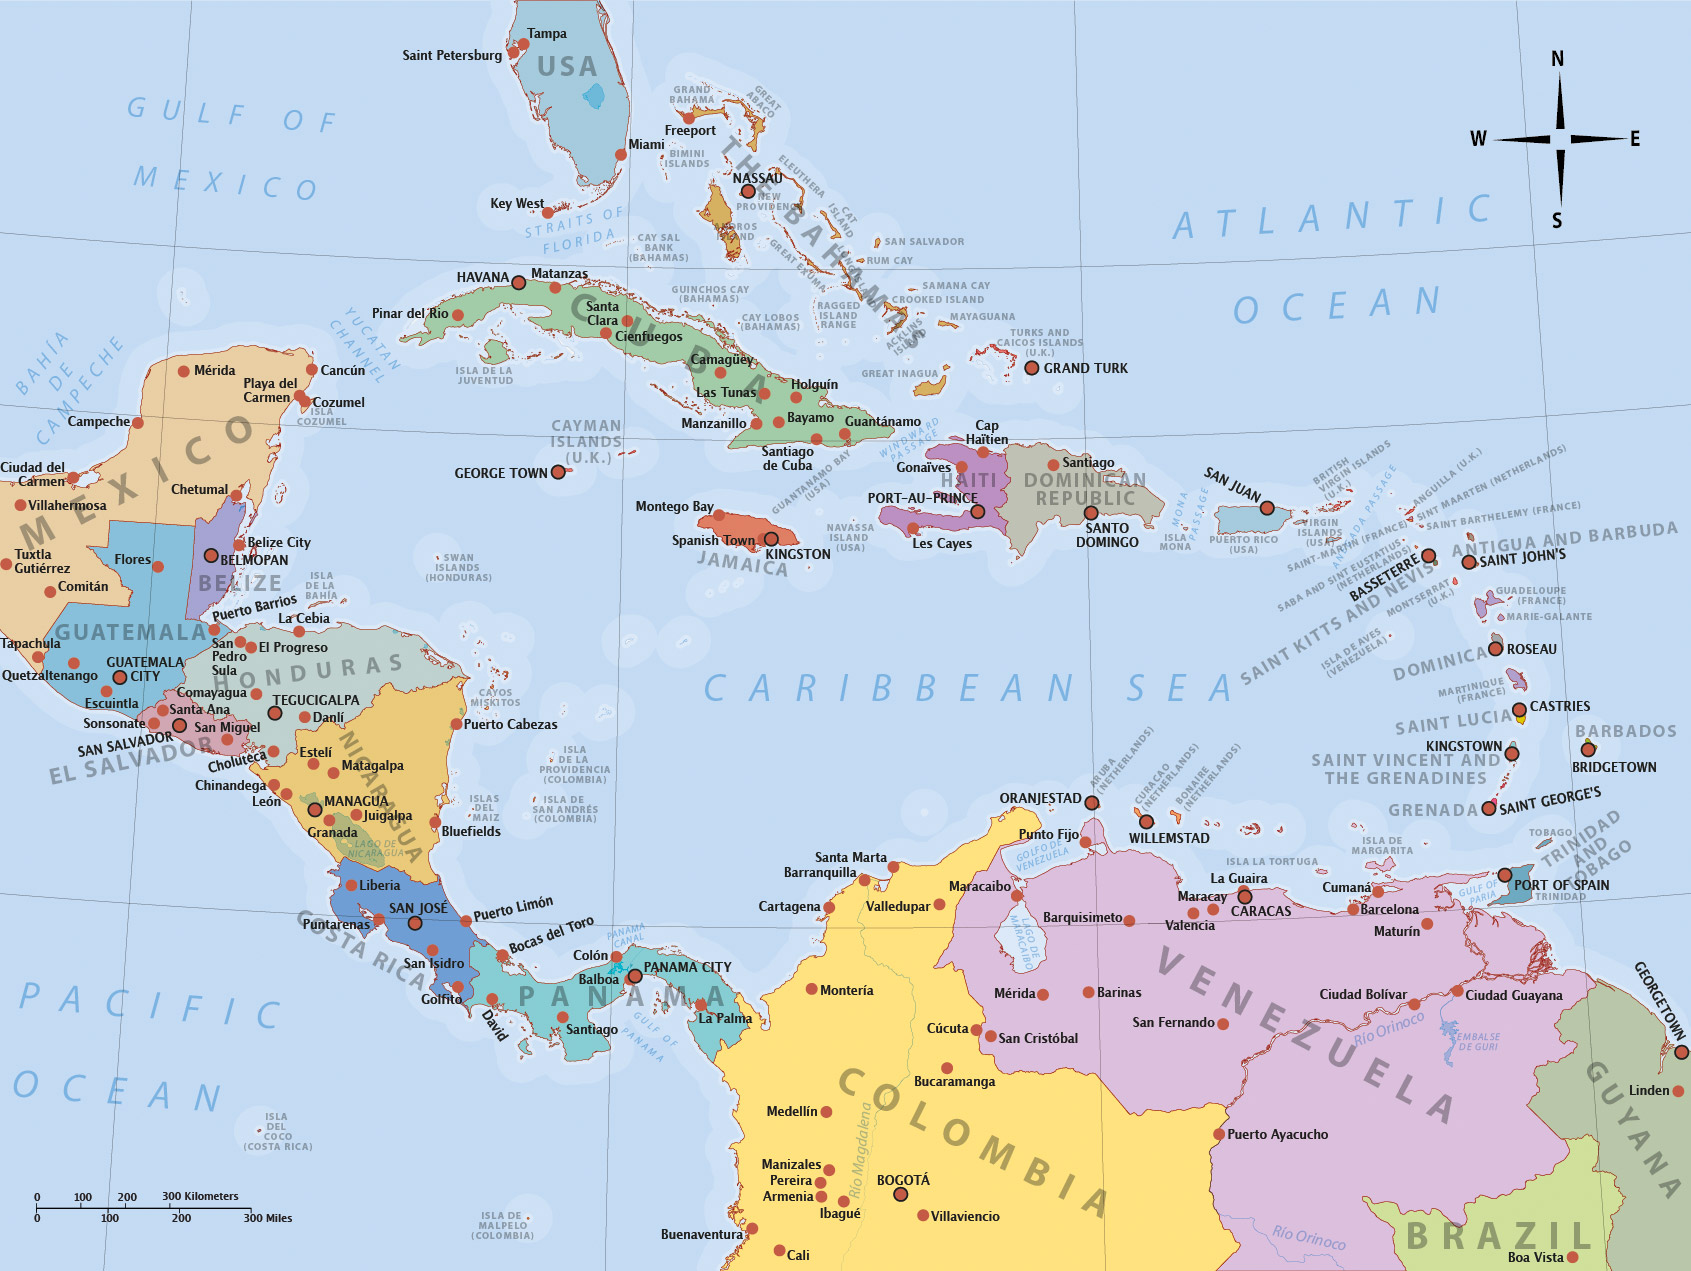 ingoFonts map of Central America